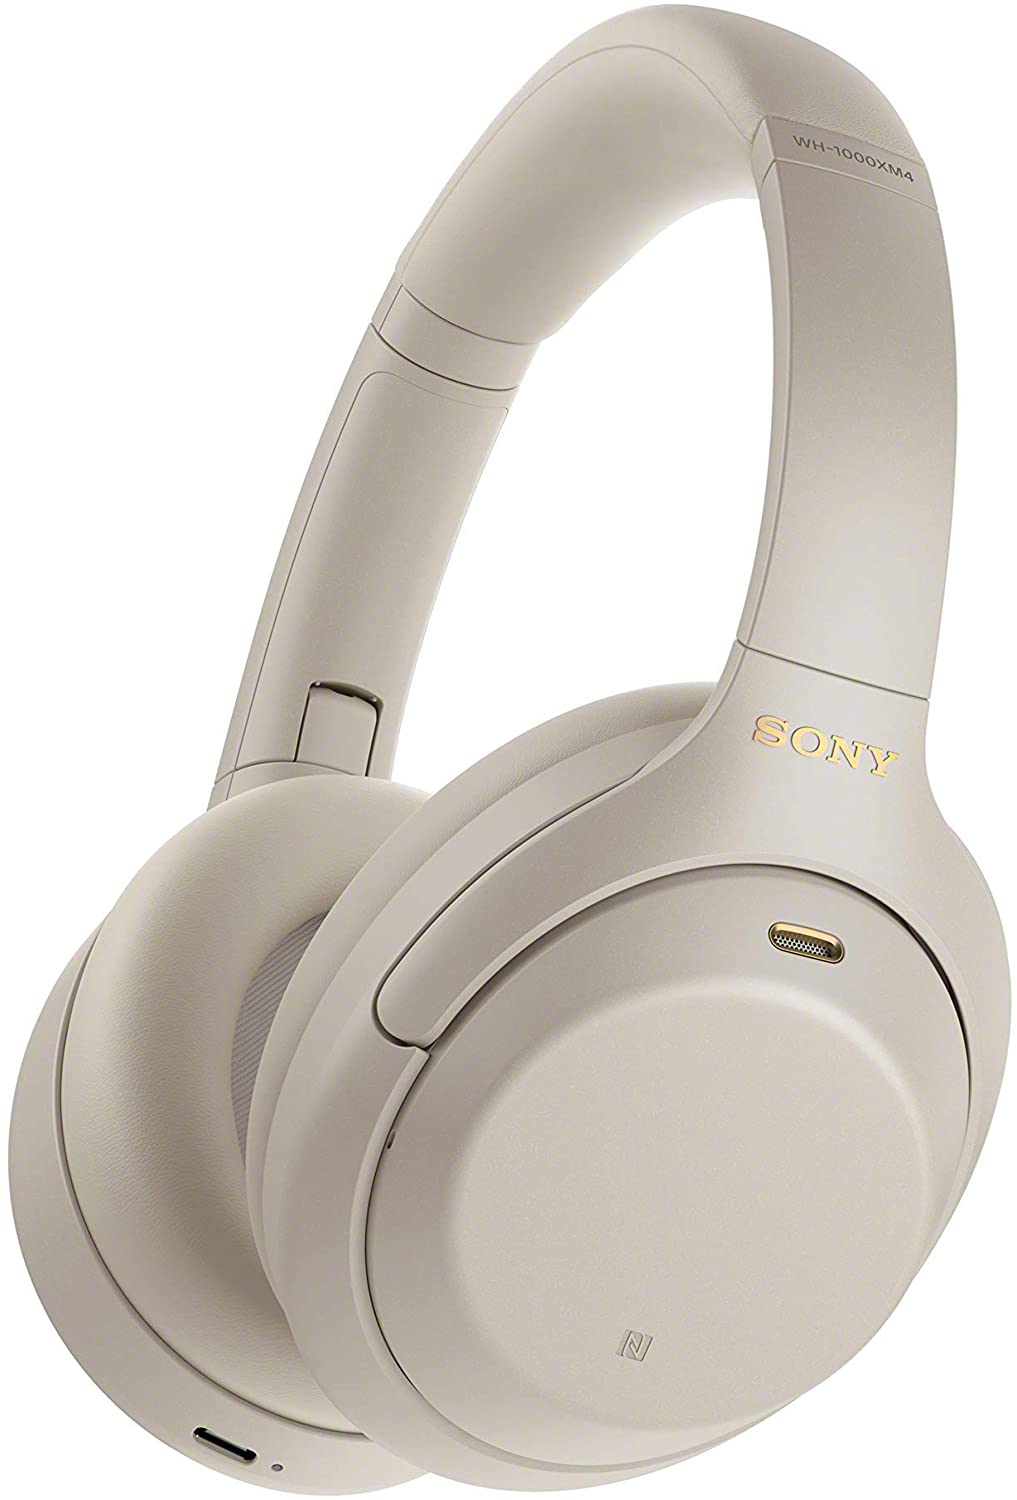 Sony WH-1000XM4 Wireless Noise-Cancelling Over-the-Ear Headphones - Silver (Certified Refurbished)